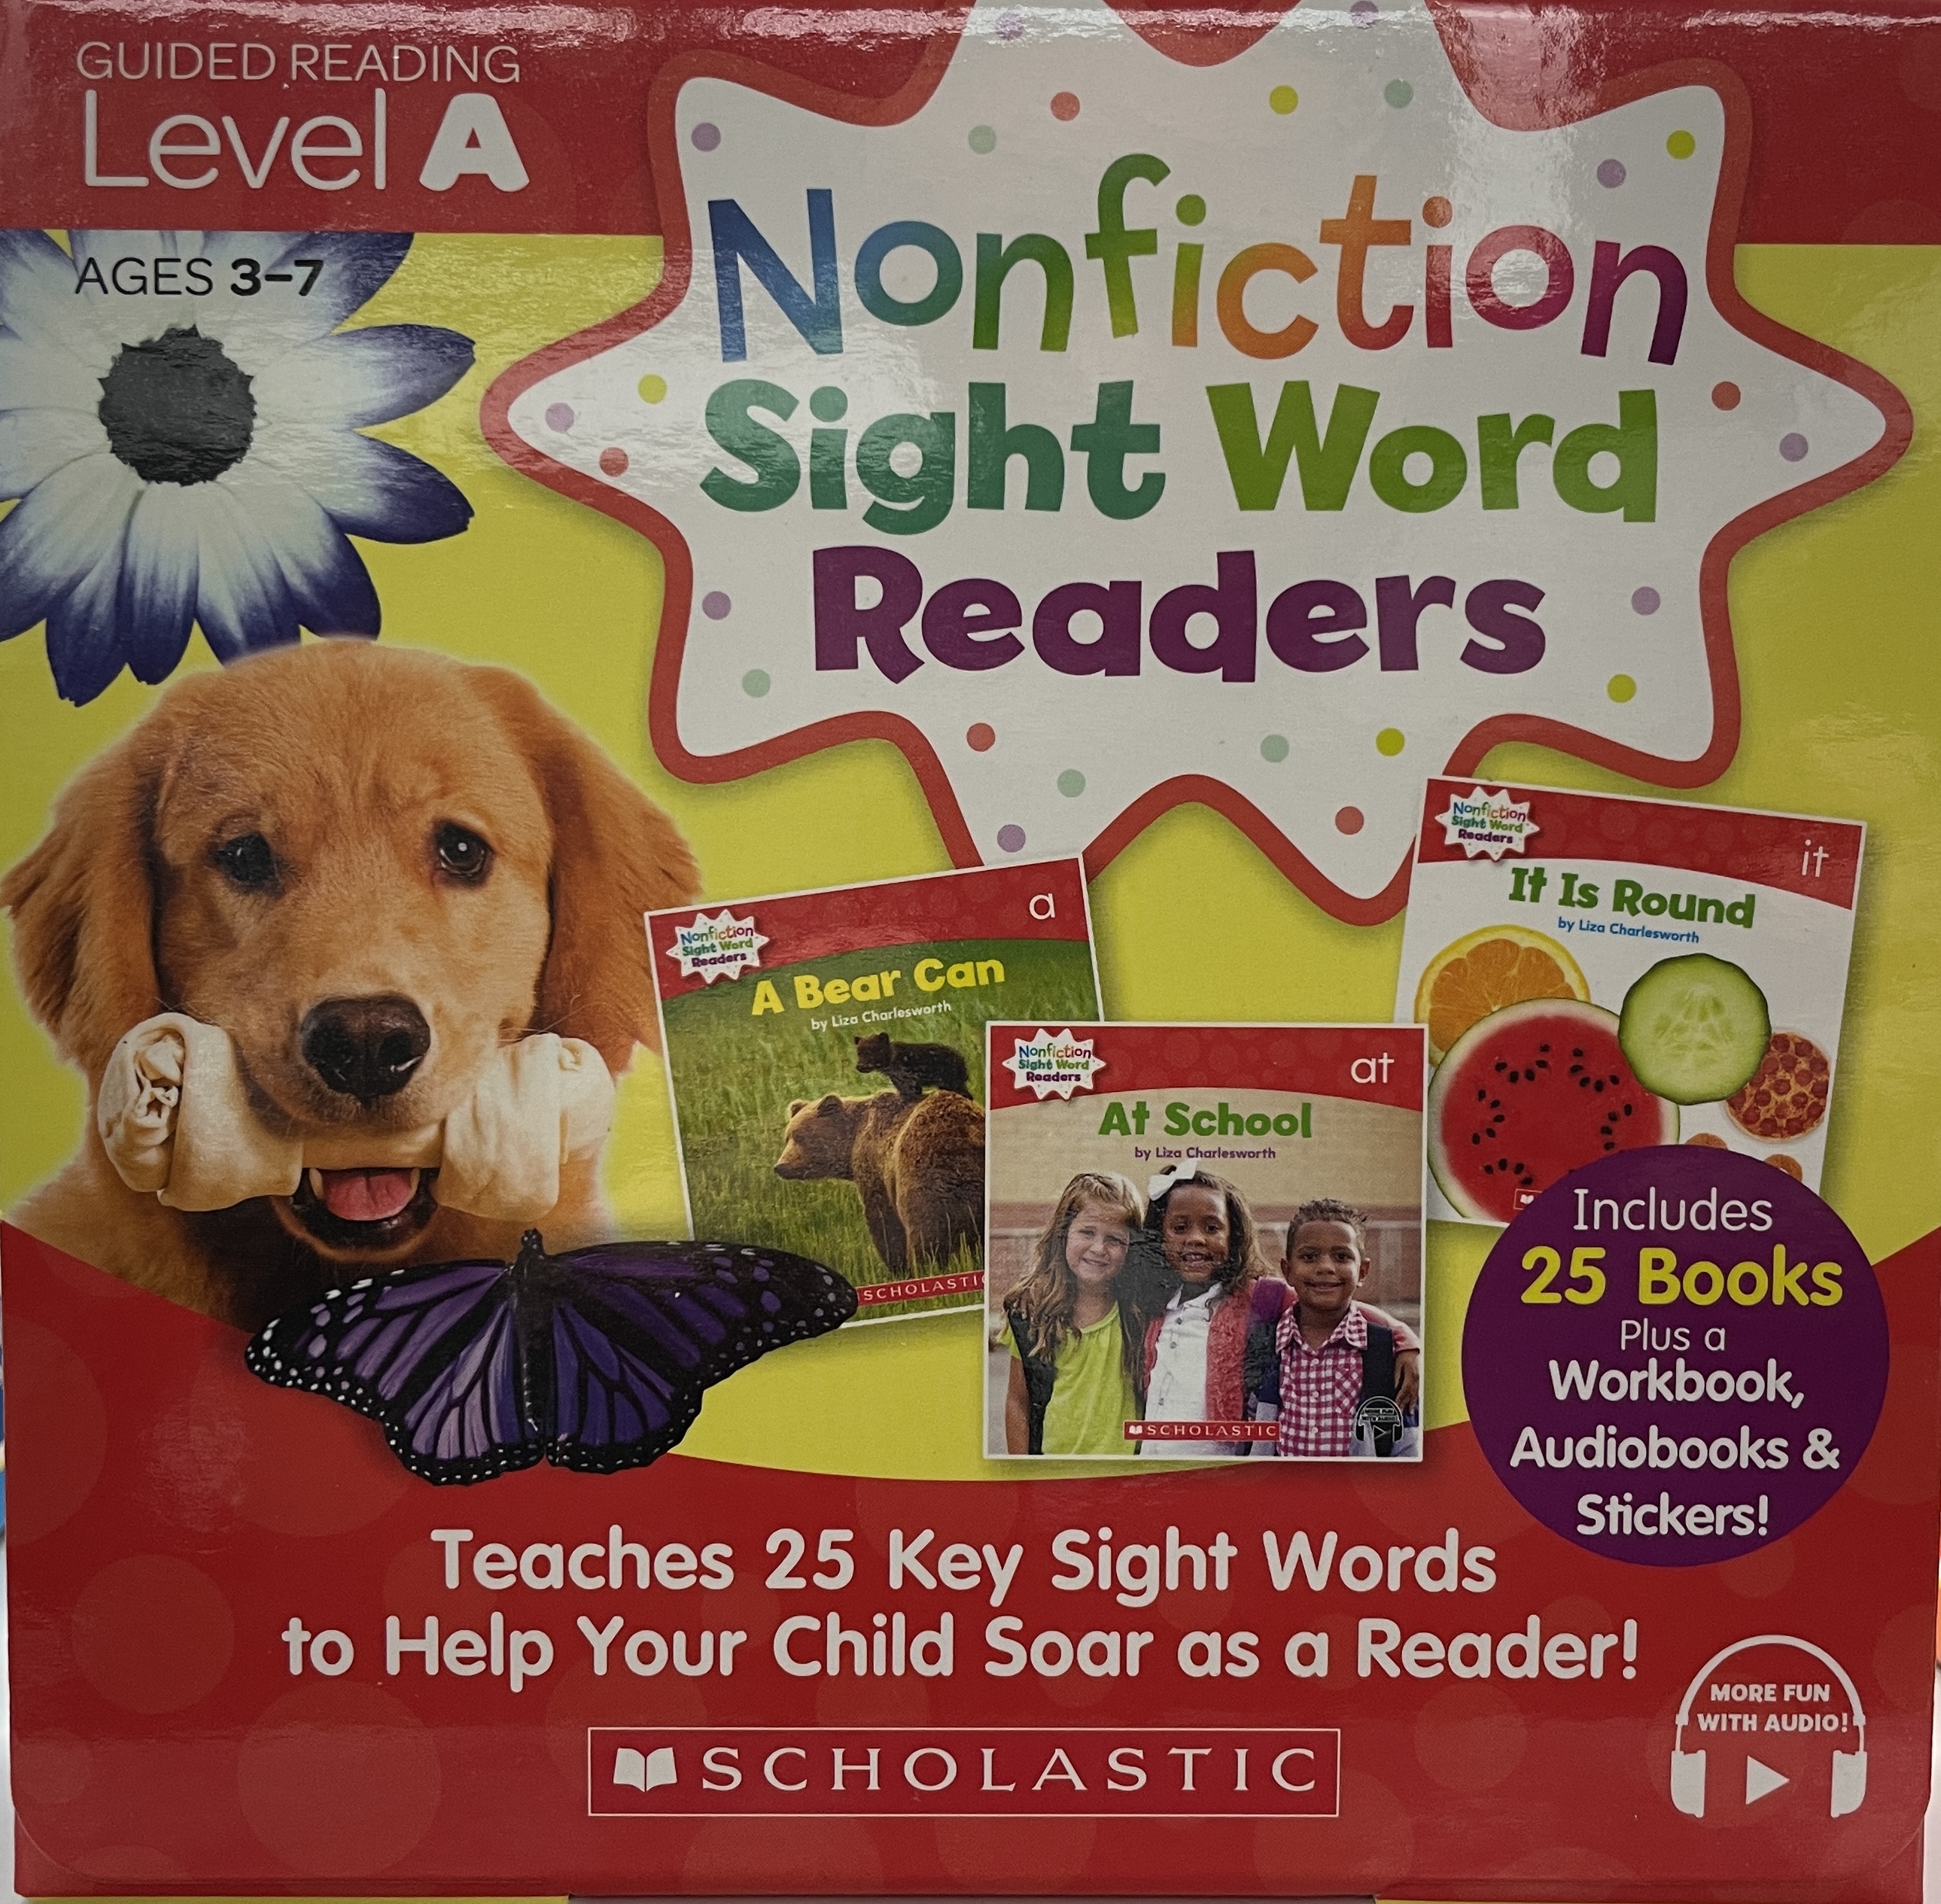 NONFICTION SIGHT WORD READERS LEVEL A～D